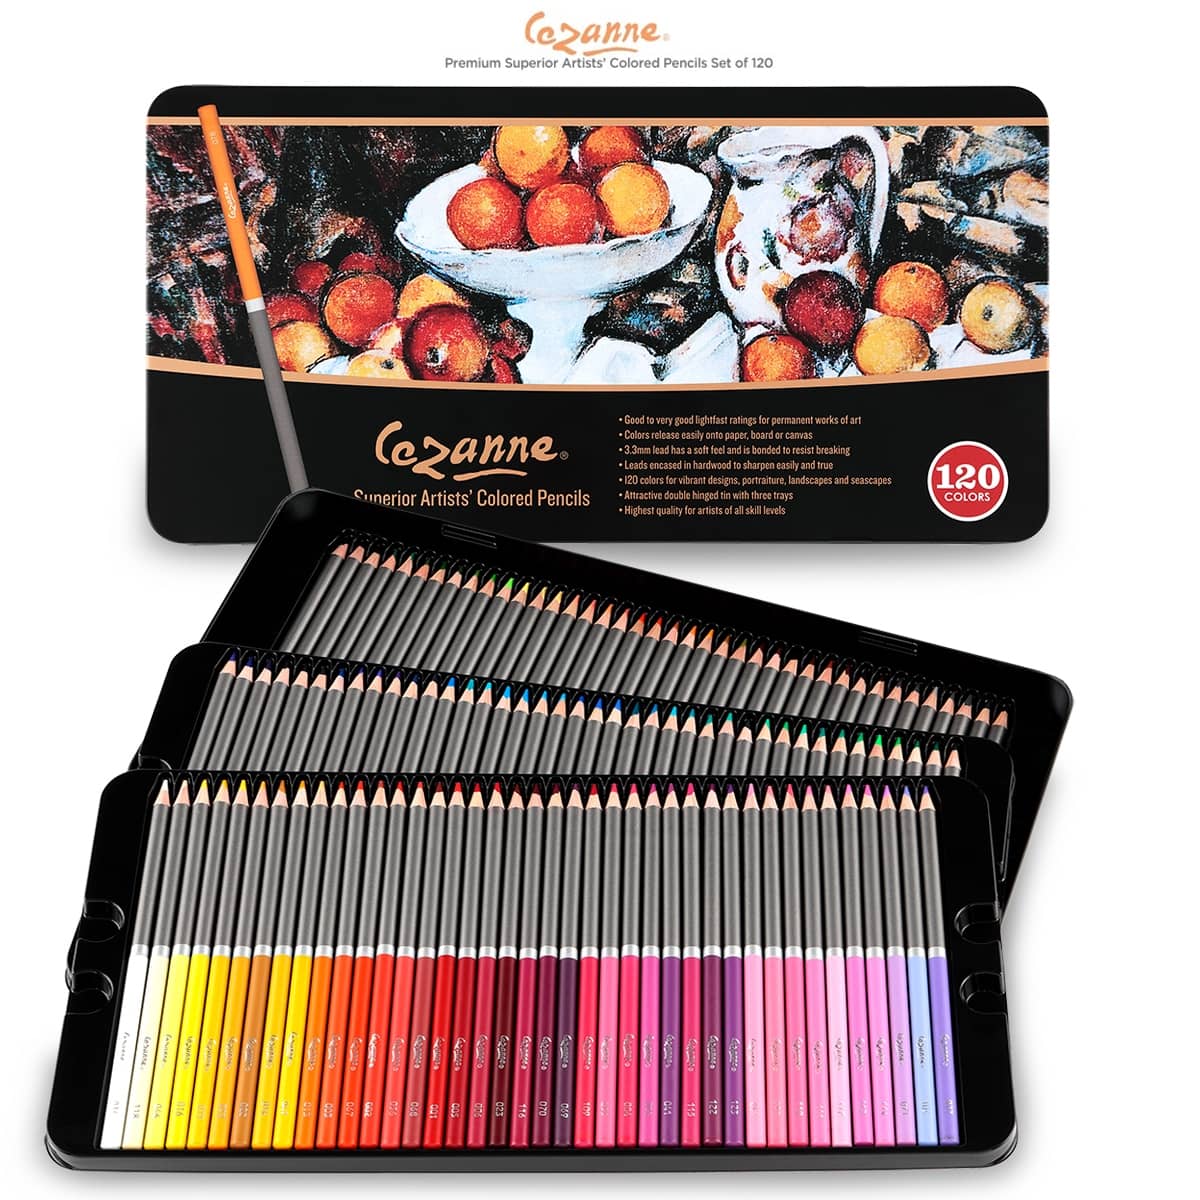 Master 150 Colored Pencil Mega Set with Premium Soft Thick Core Vibrant Color Leads in Tin Storage Box - Professional Ultra-Smooth Artist Quality - Bl